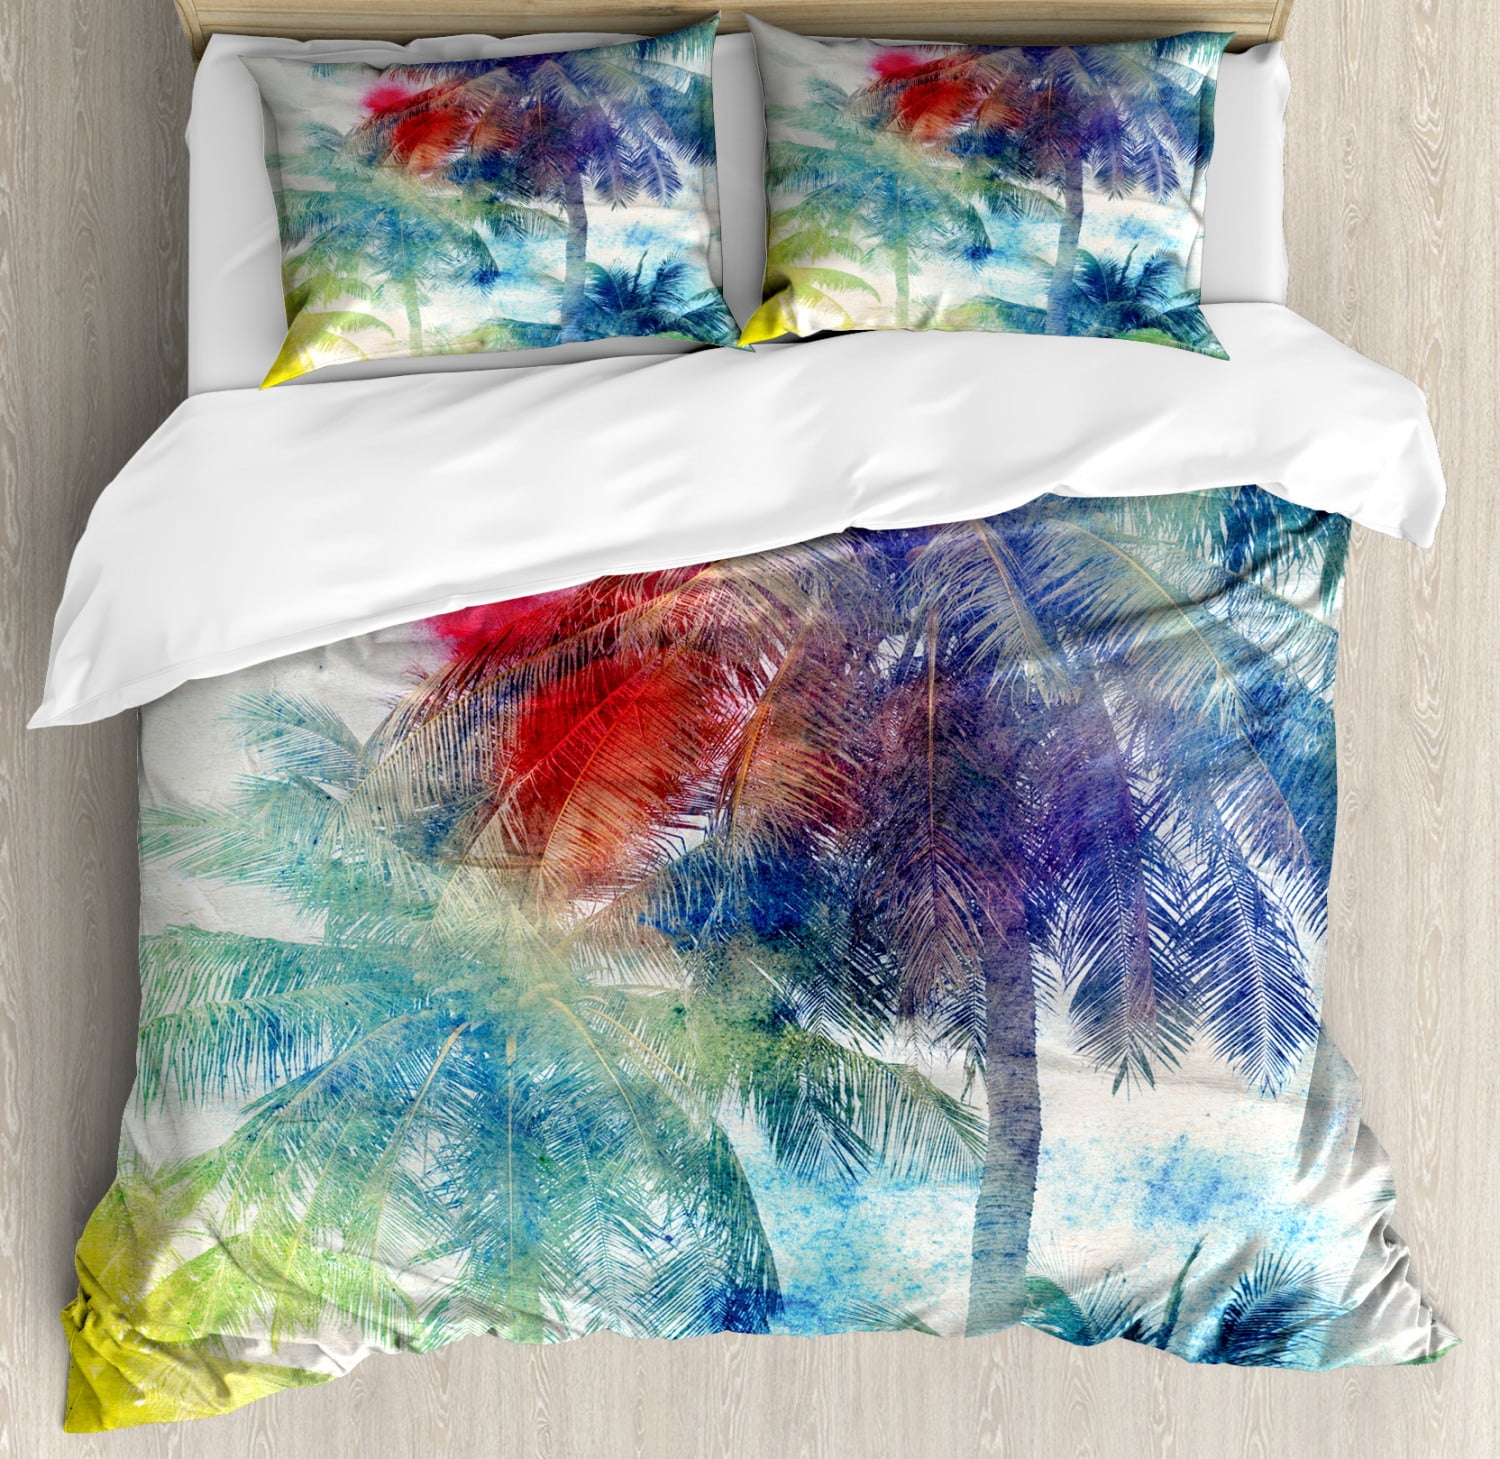 Palm Tree King Size Duvet Cover Set, Retro Watercolor Silhouettes of ...